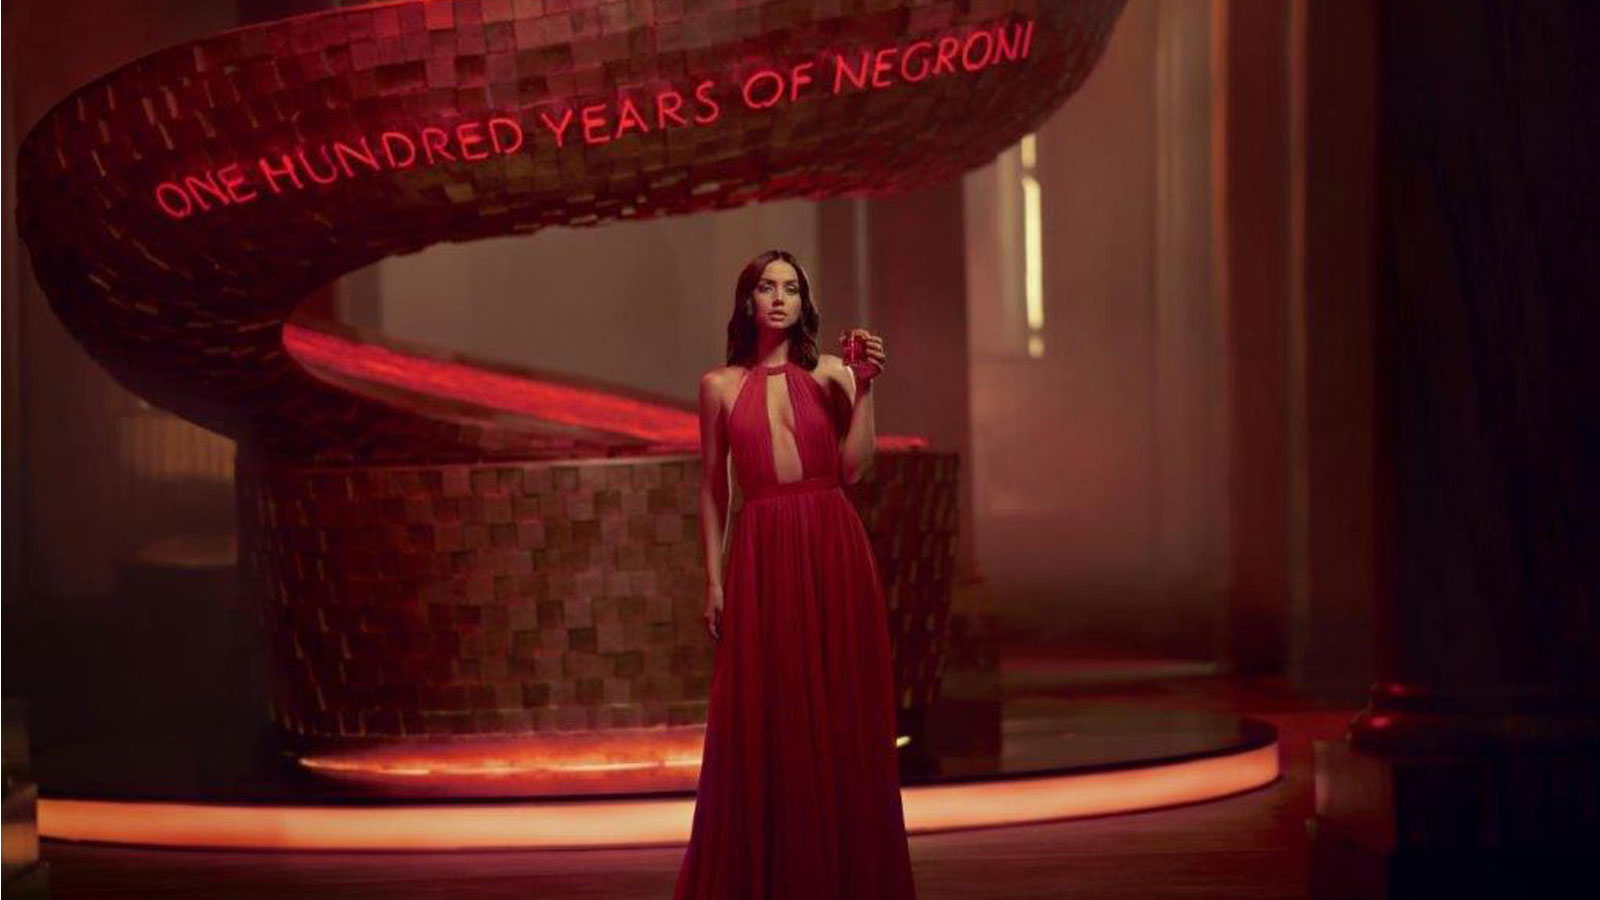 Campari launches new short movie, Entering Red, directed by Matteo Garrone, starring Ana De Armas